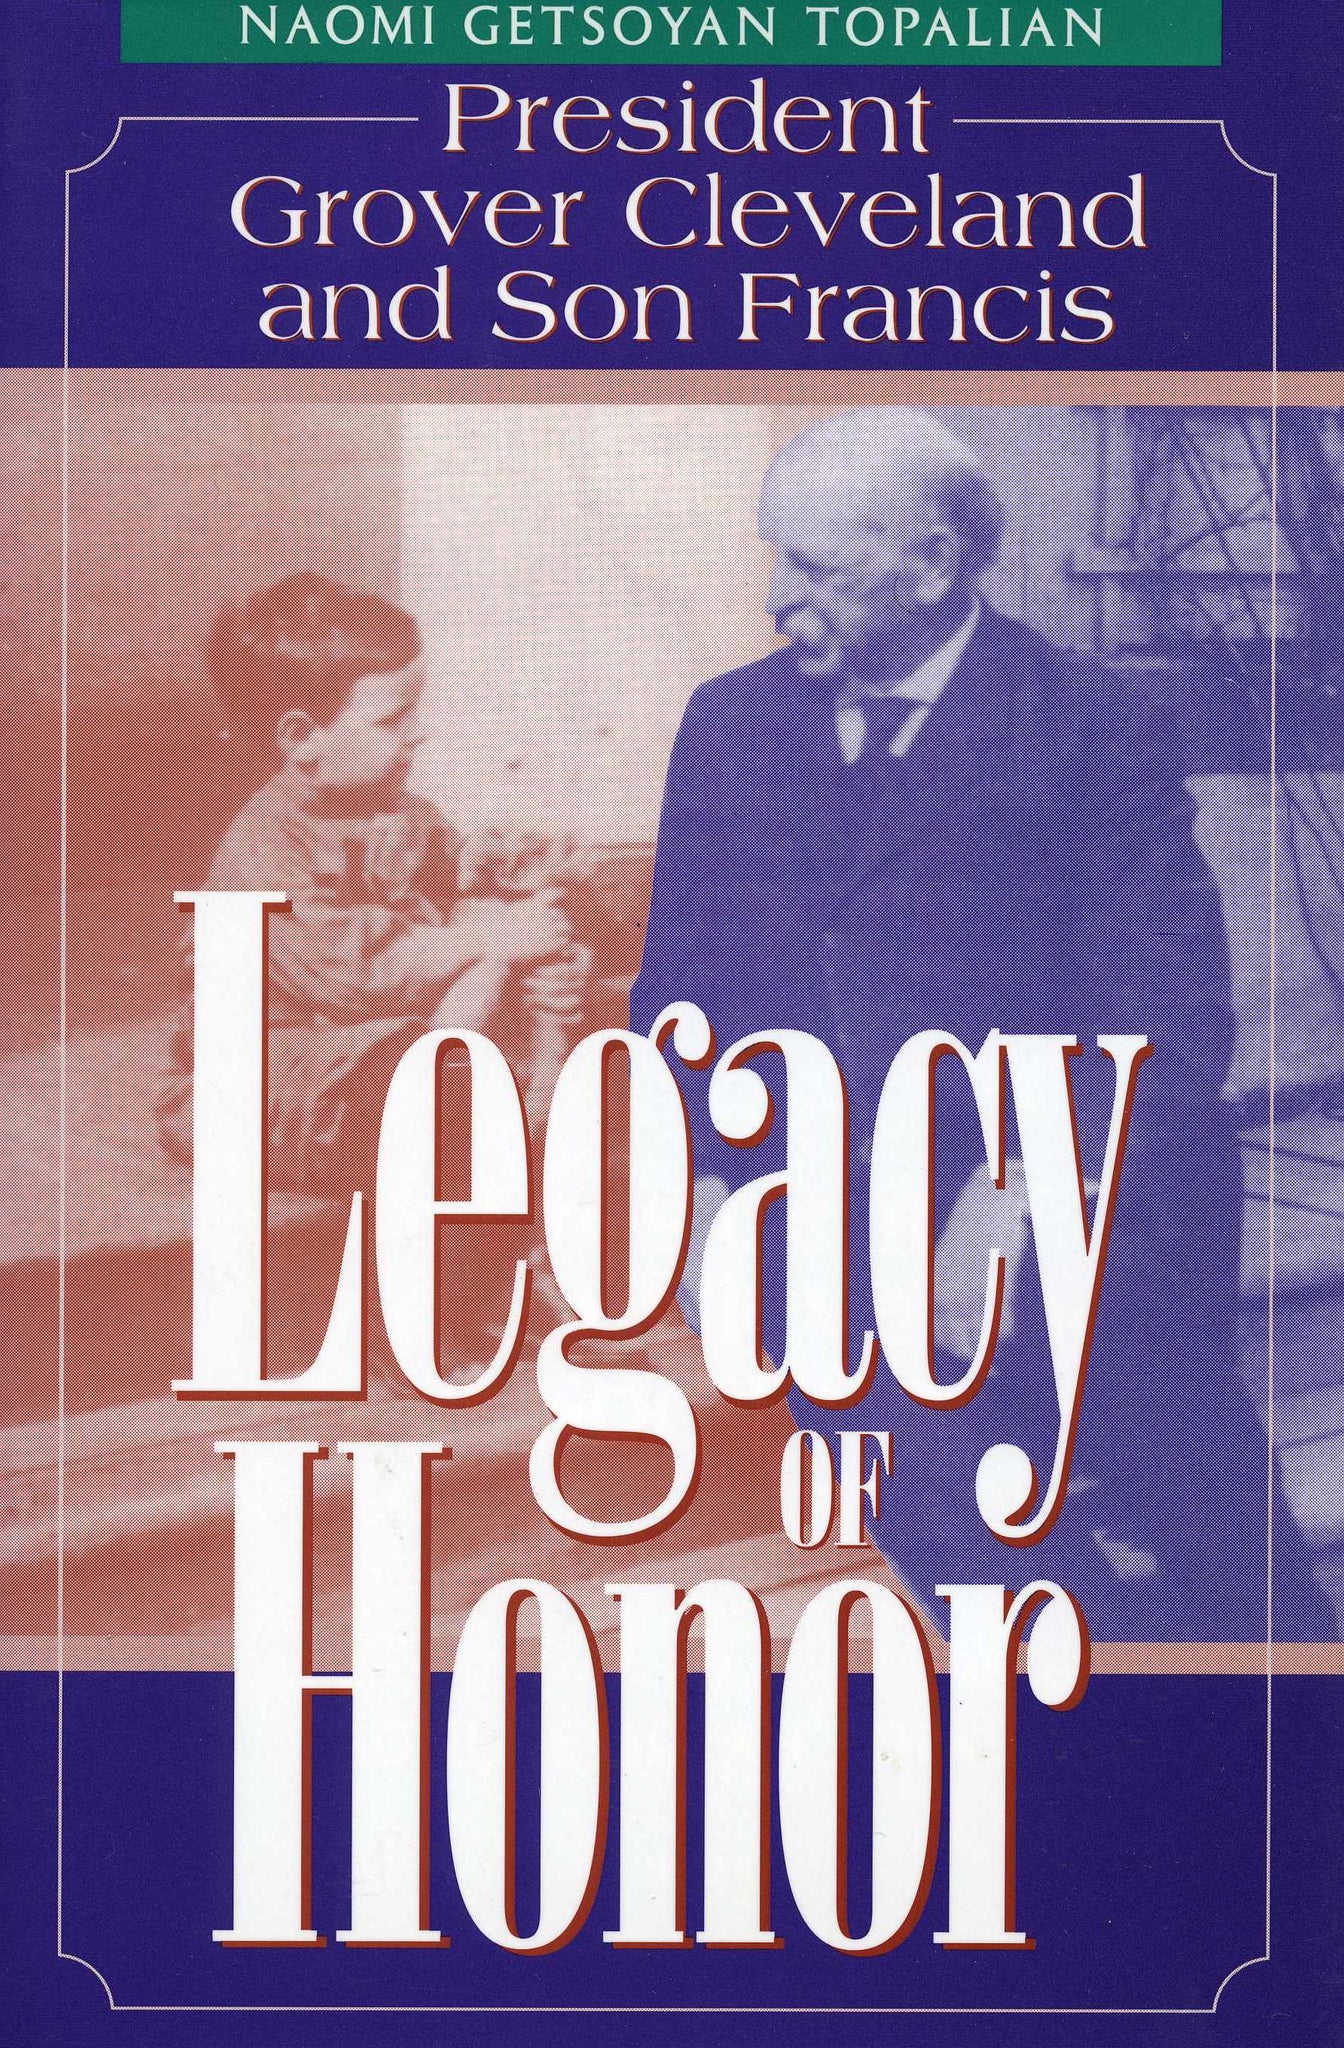 LEGACY OF HONOR: President Grover Cleveland and His Son Francis